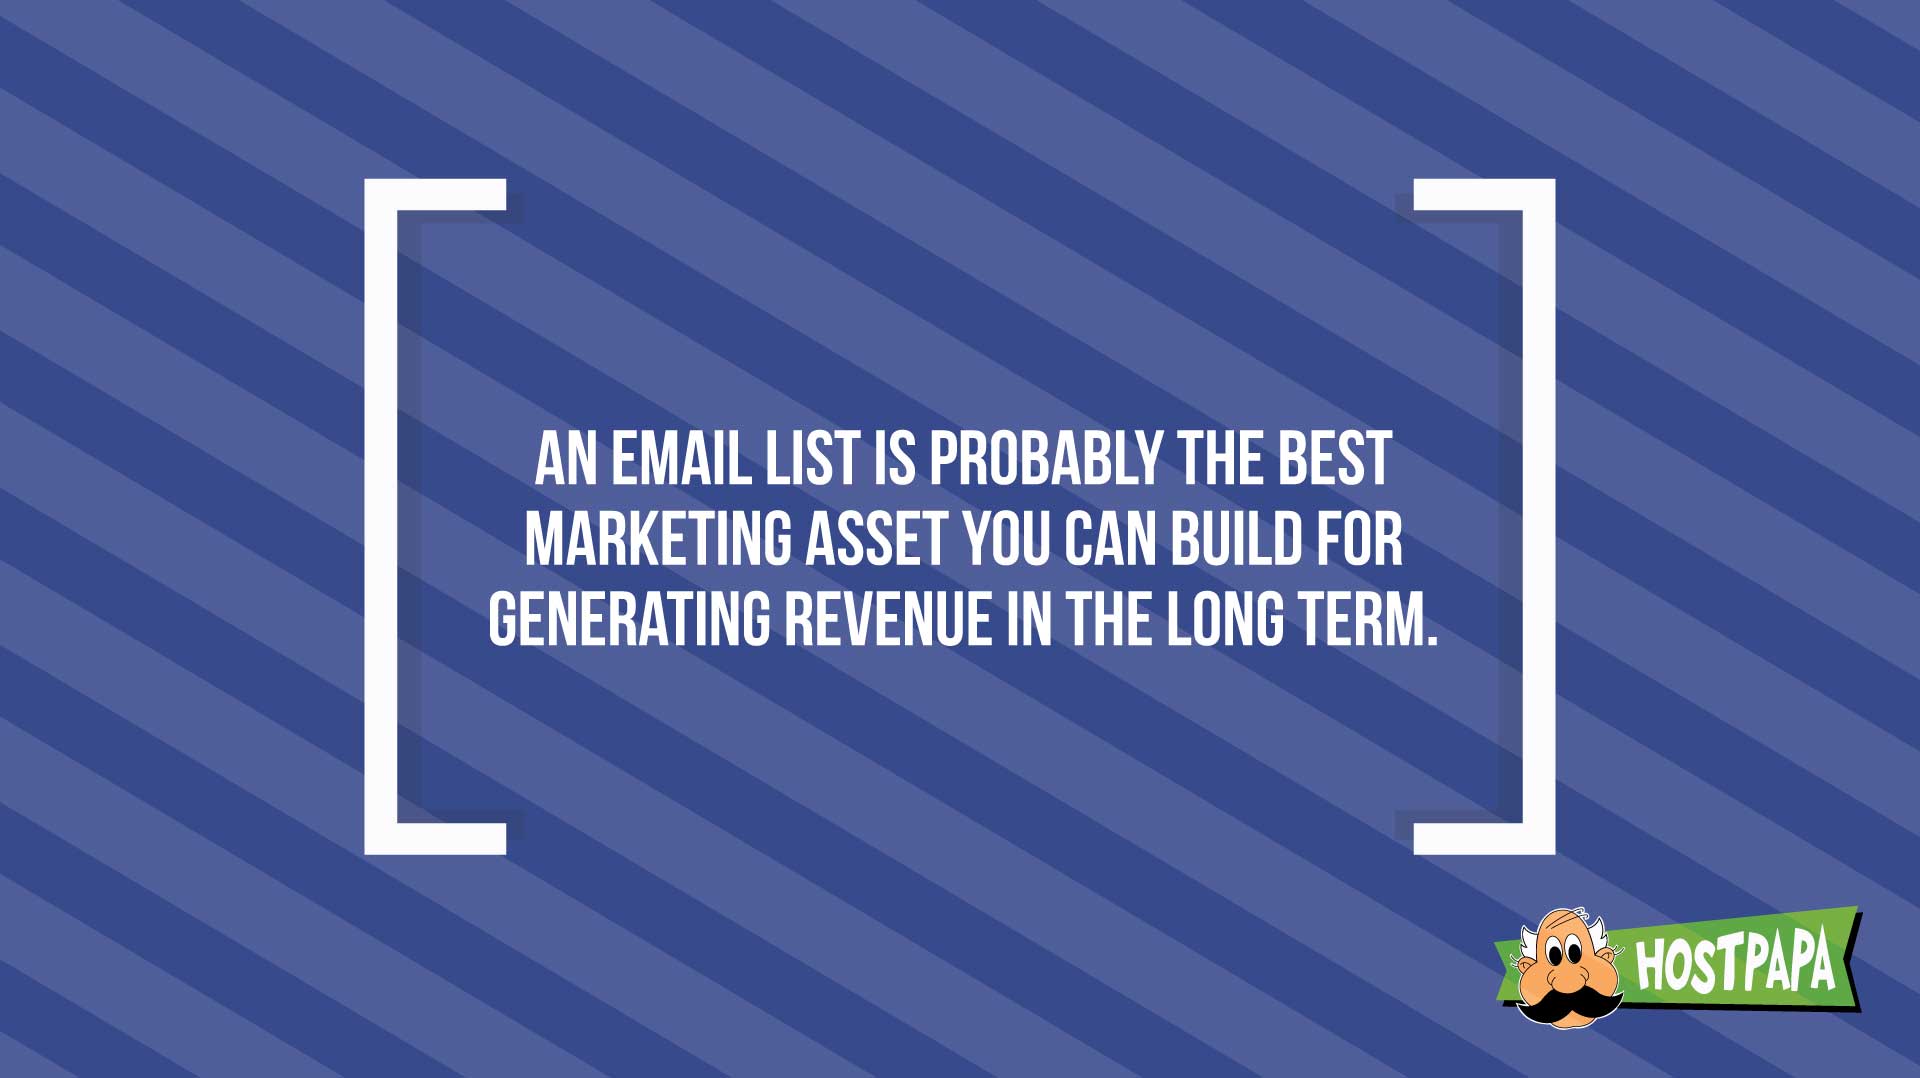 An email list is probably the best marketing asset you can build for generating revenue in the long term